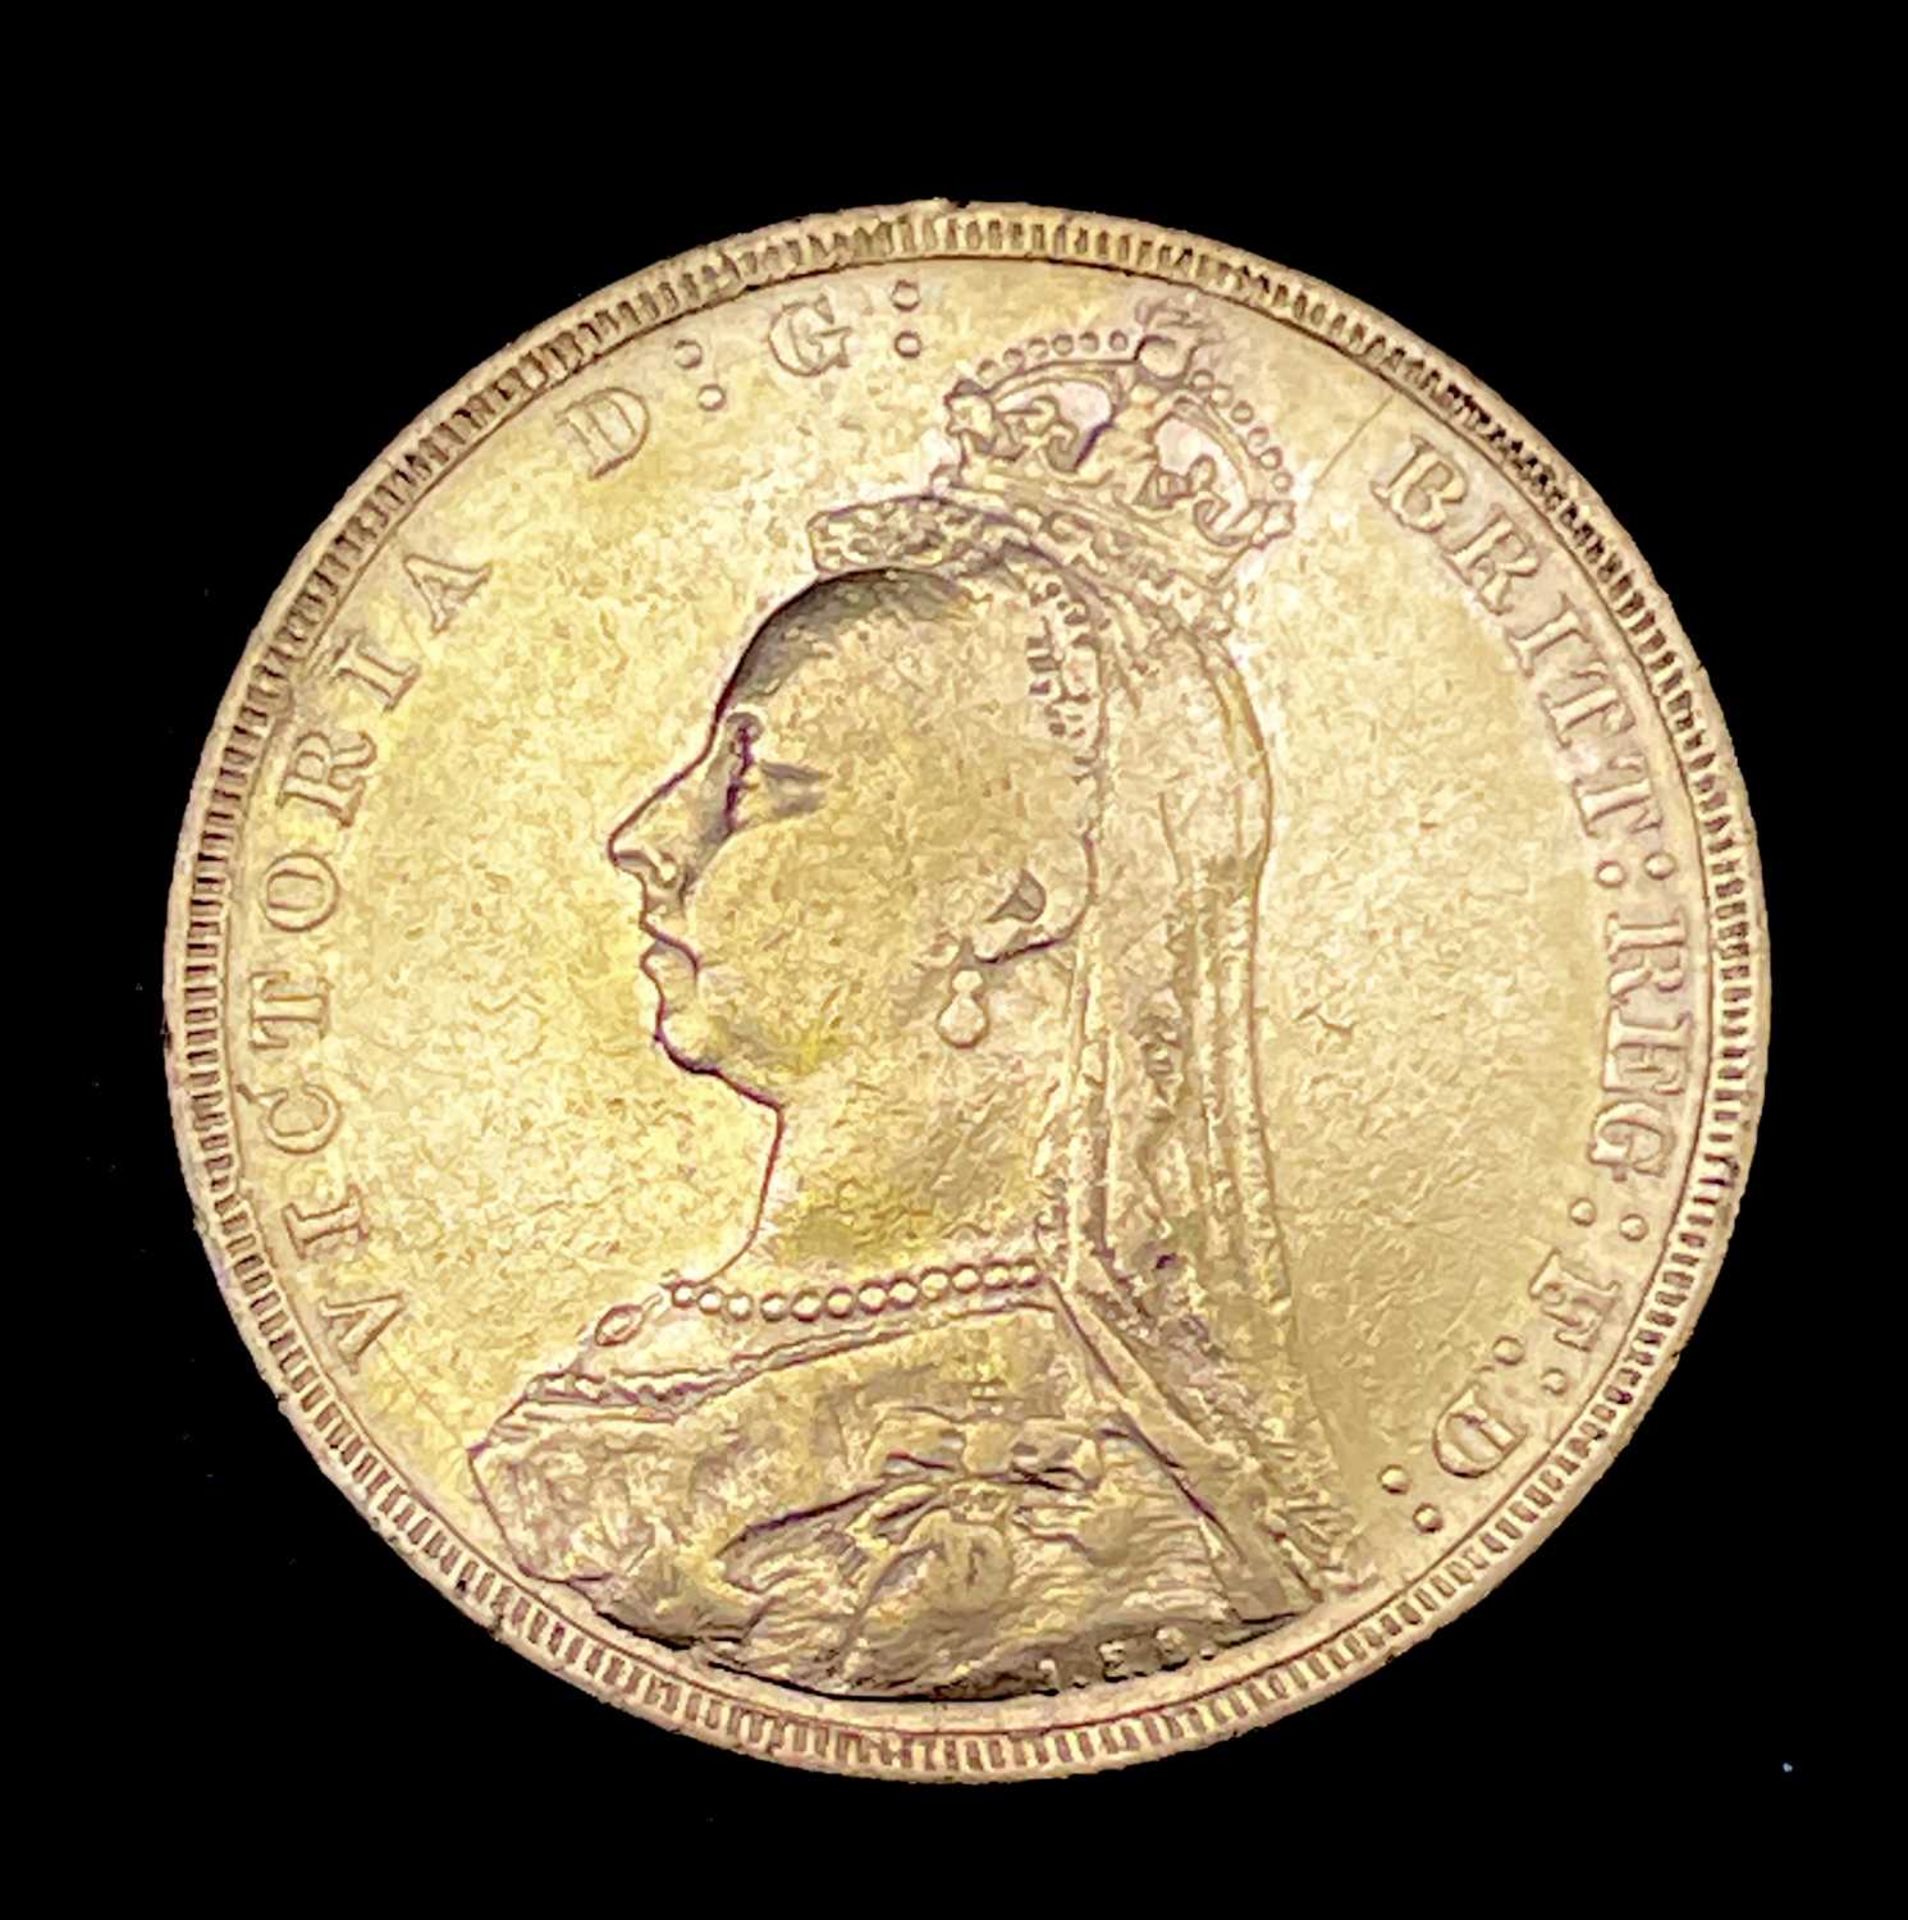 Great Britain Gold Sovereign 1889 Jubilee Head Condition: please request a condition report if you - Image 2 of 2